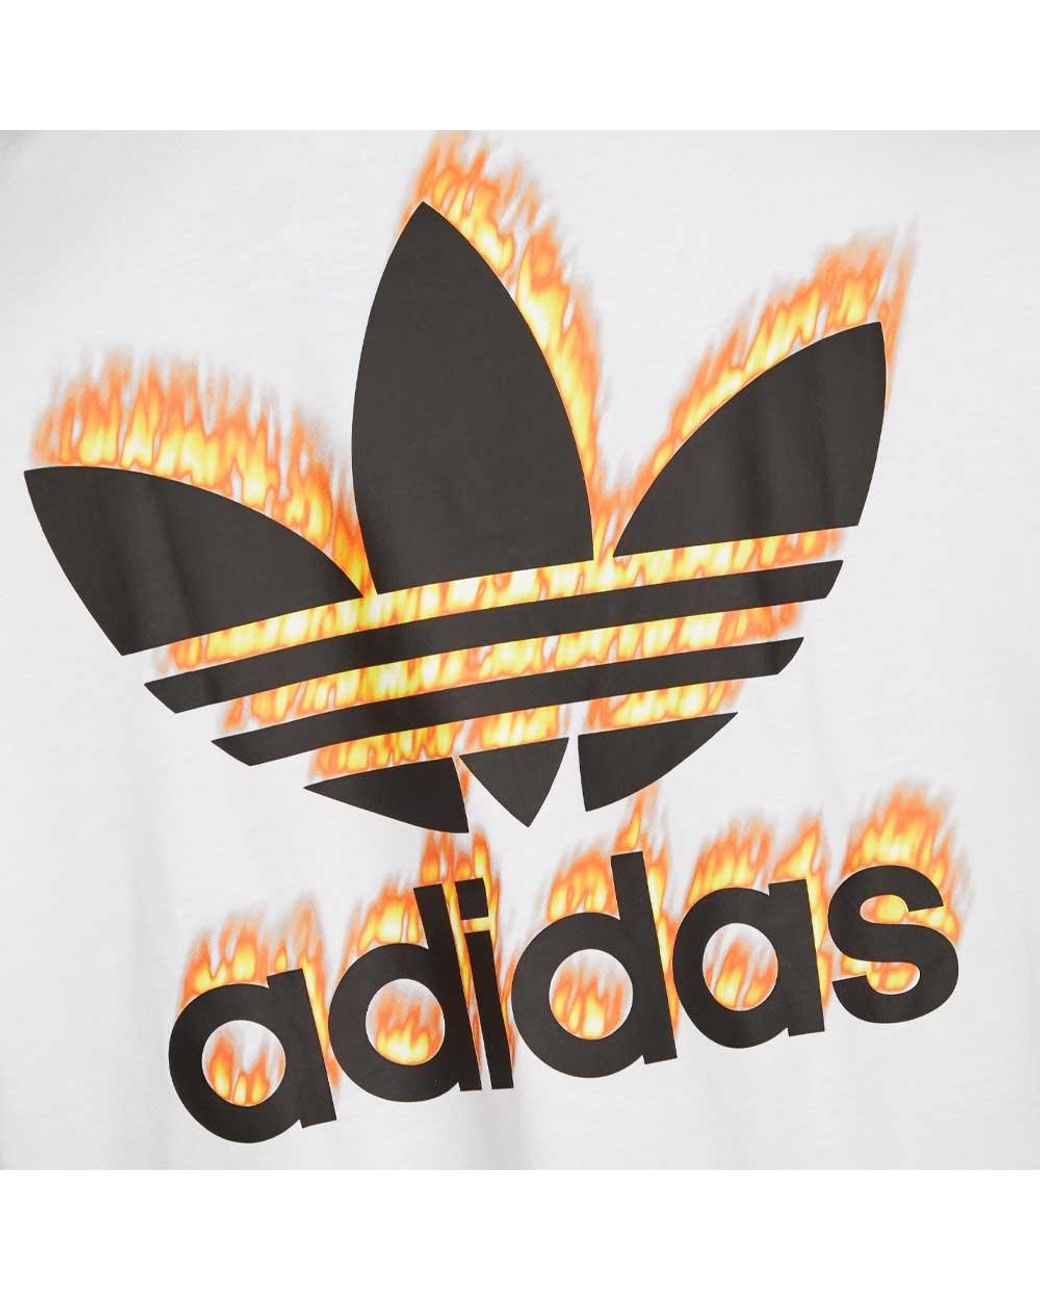 adidas Fire T-shirt in White for Men | Lyst